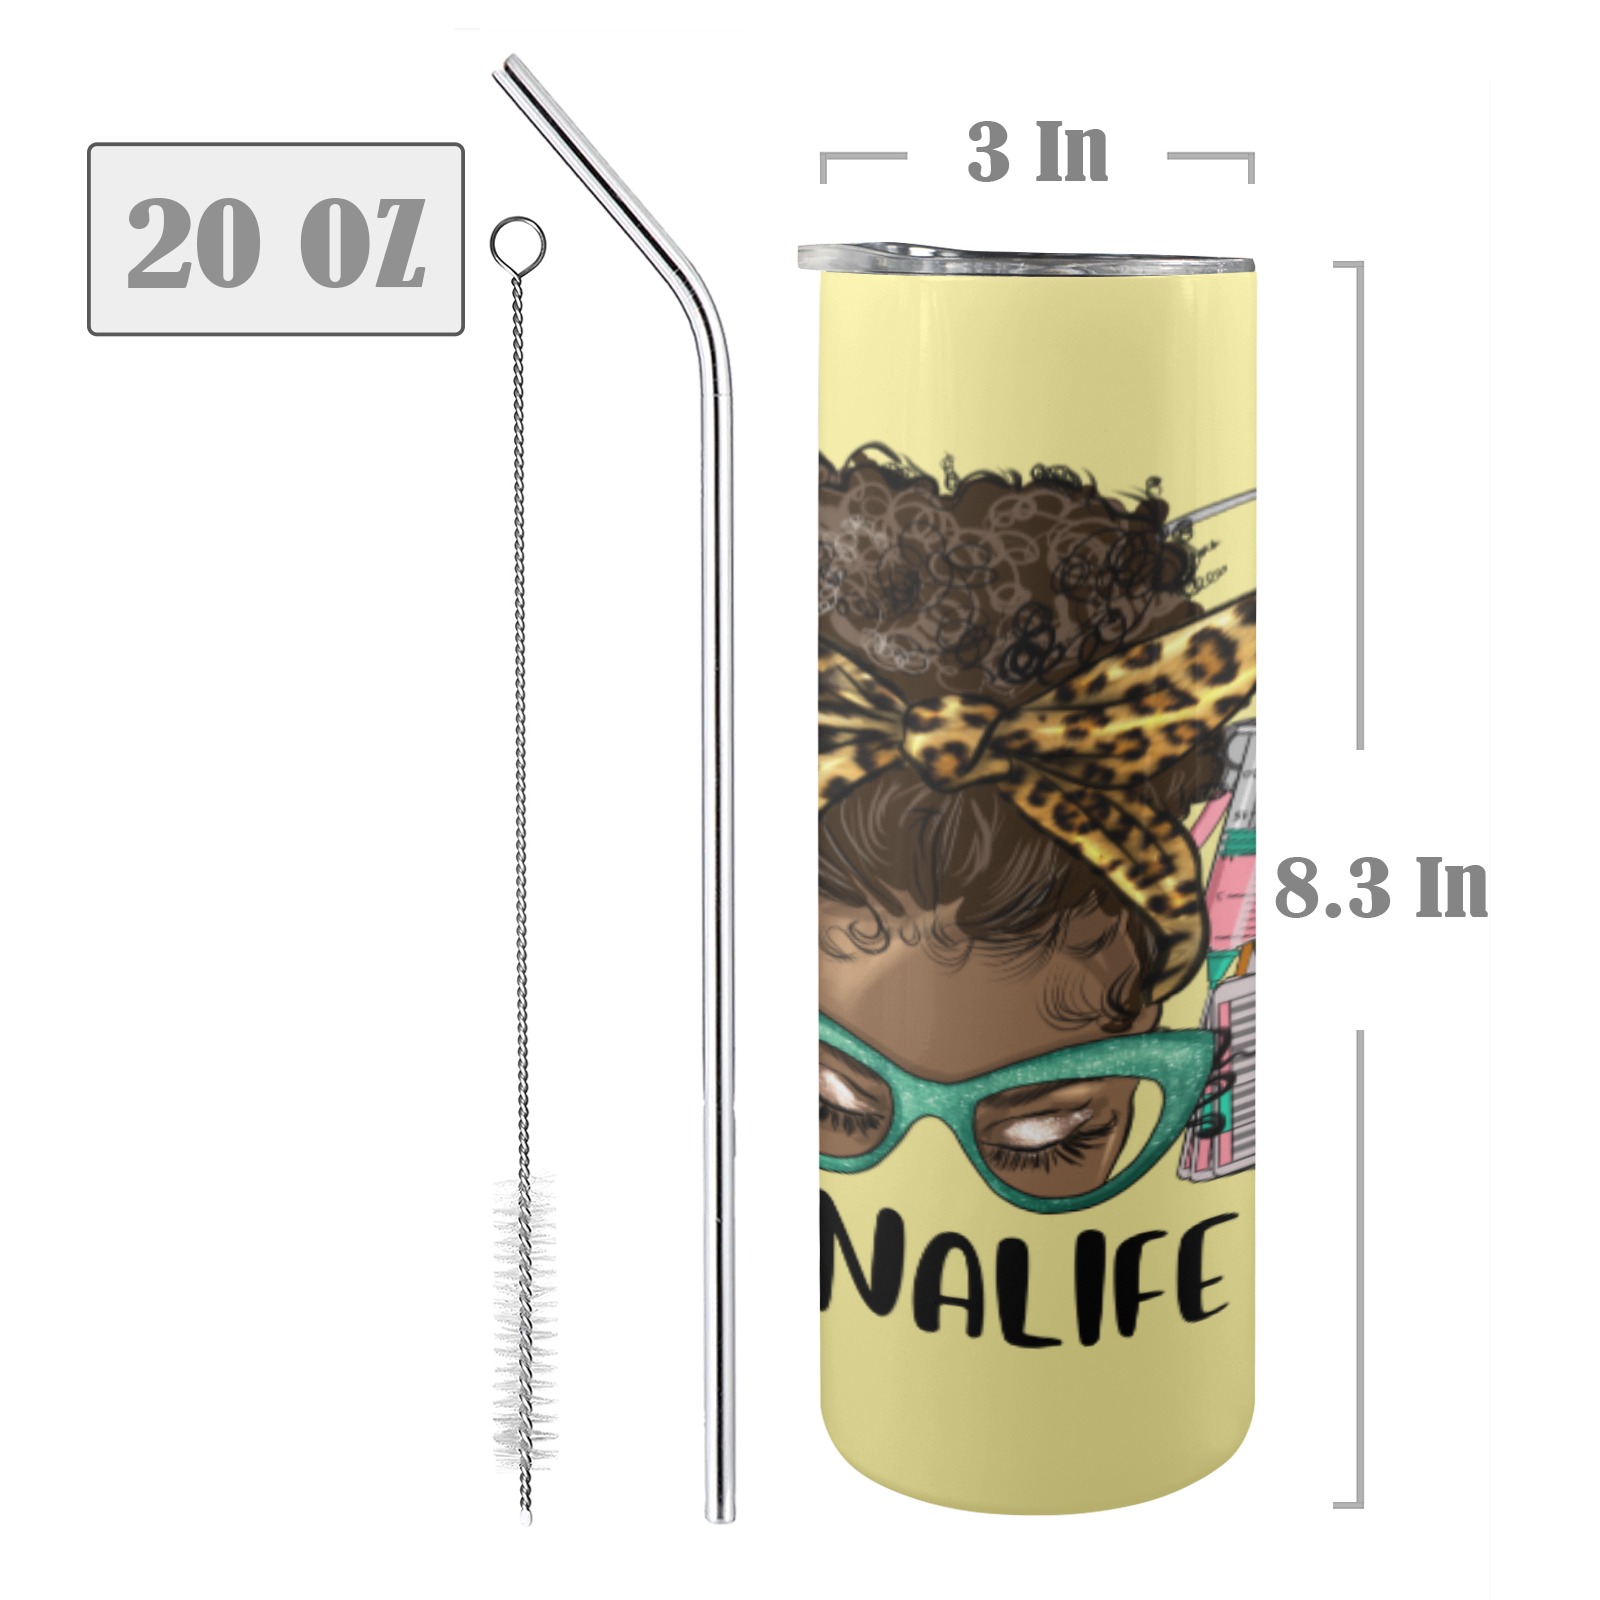 Afro_Messy_Bun_Cna_Life tumbler 20oz Tall Skinny Tumbler with Lid and Straw